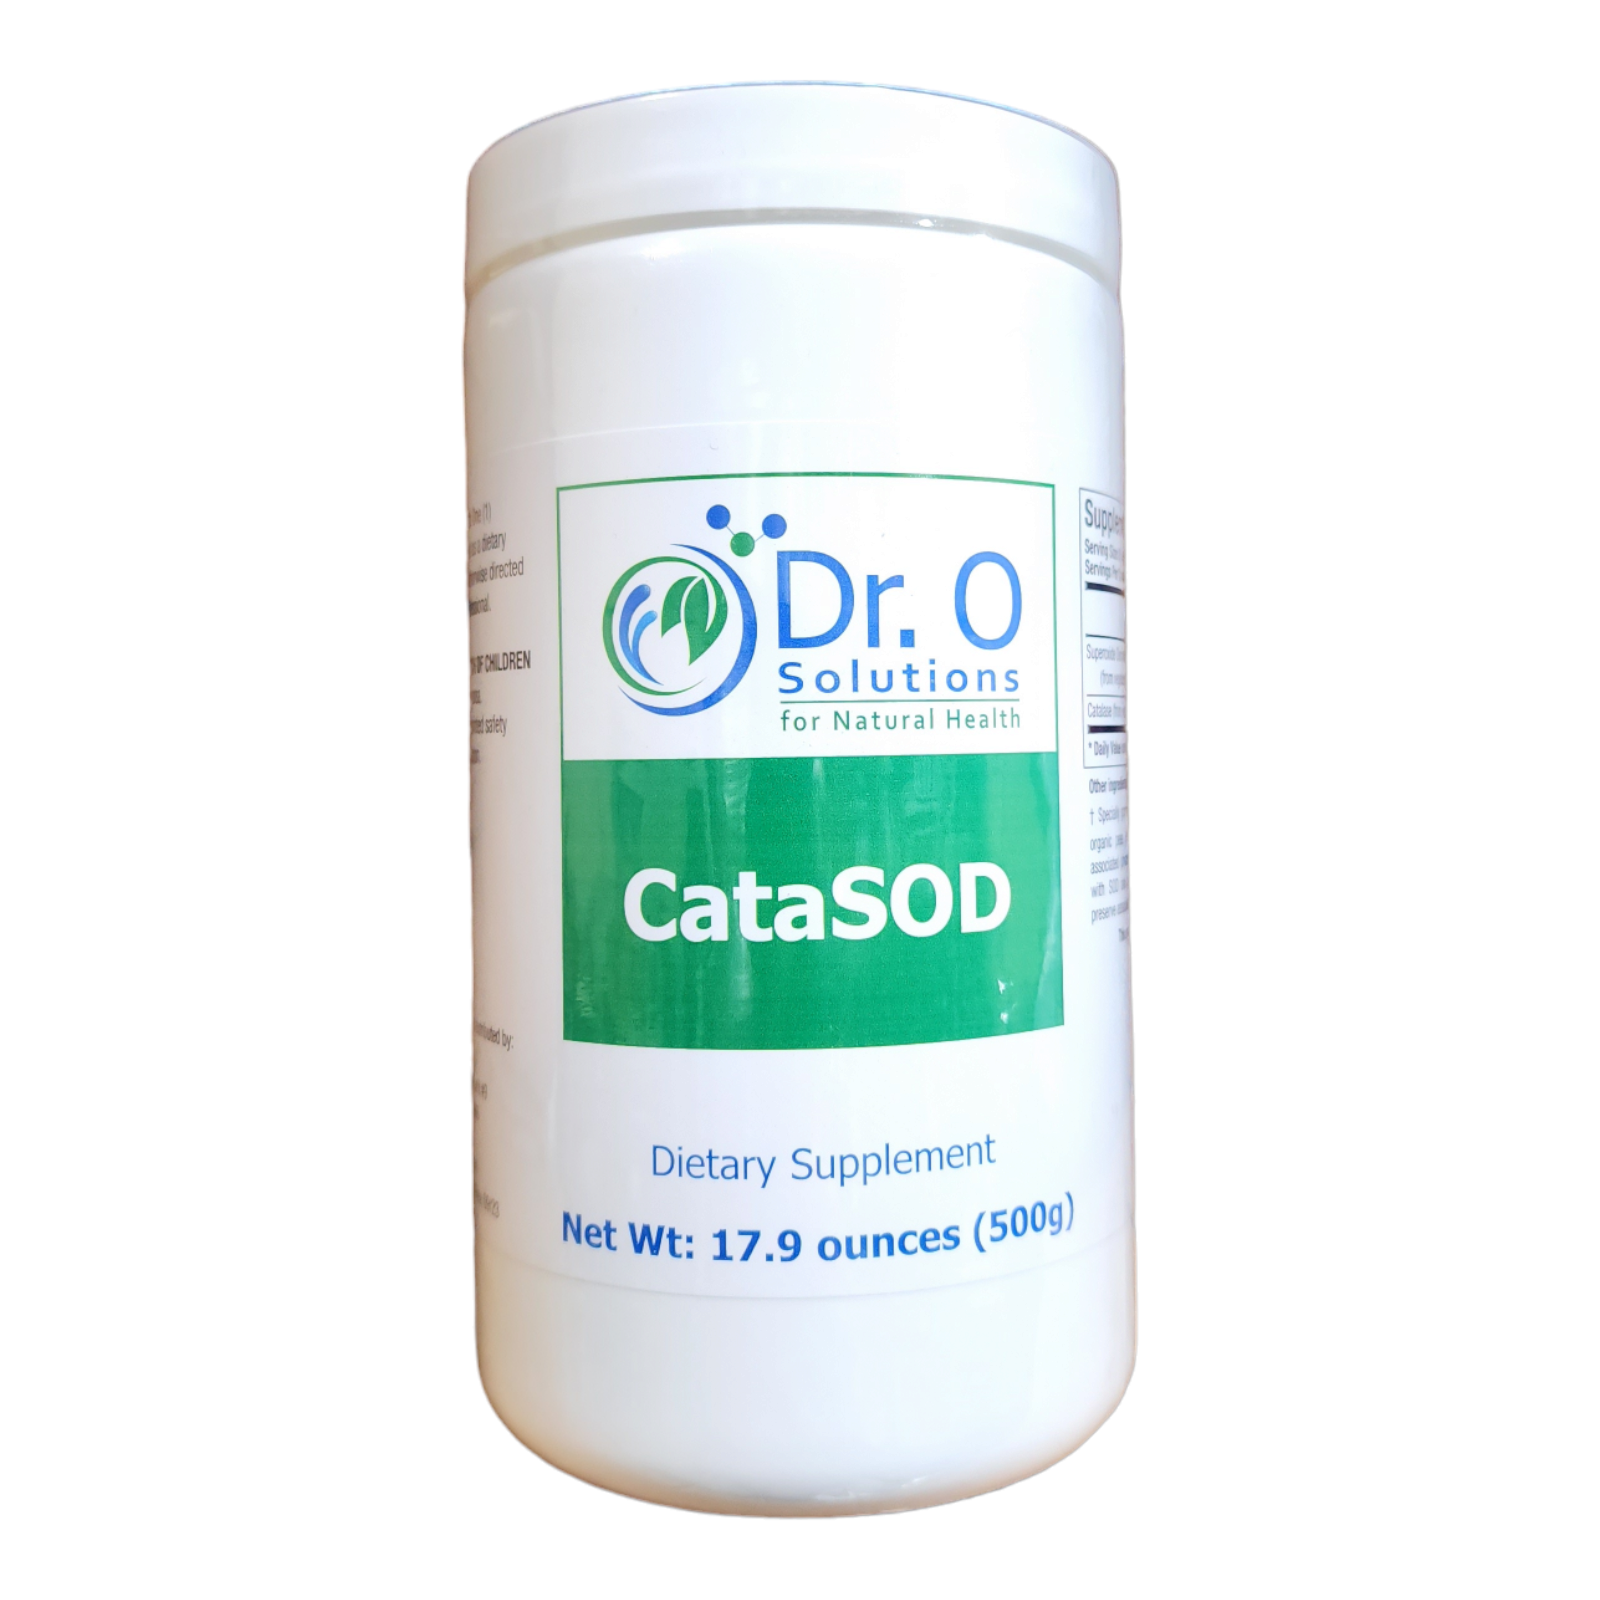 CataSOD is a dietary supplements hat works as a catalase